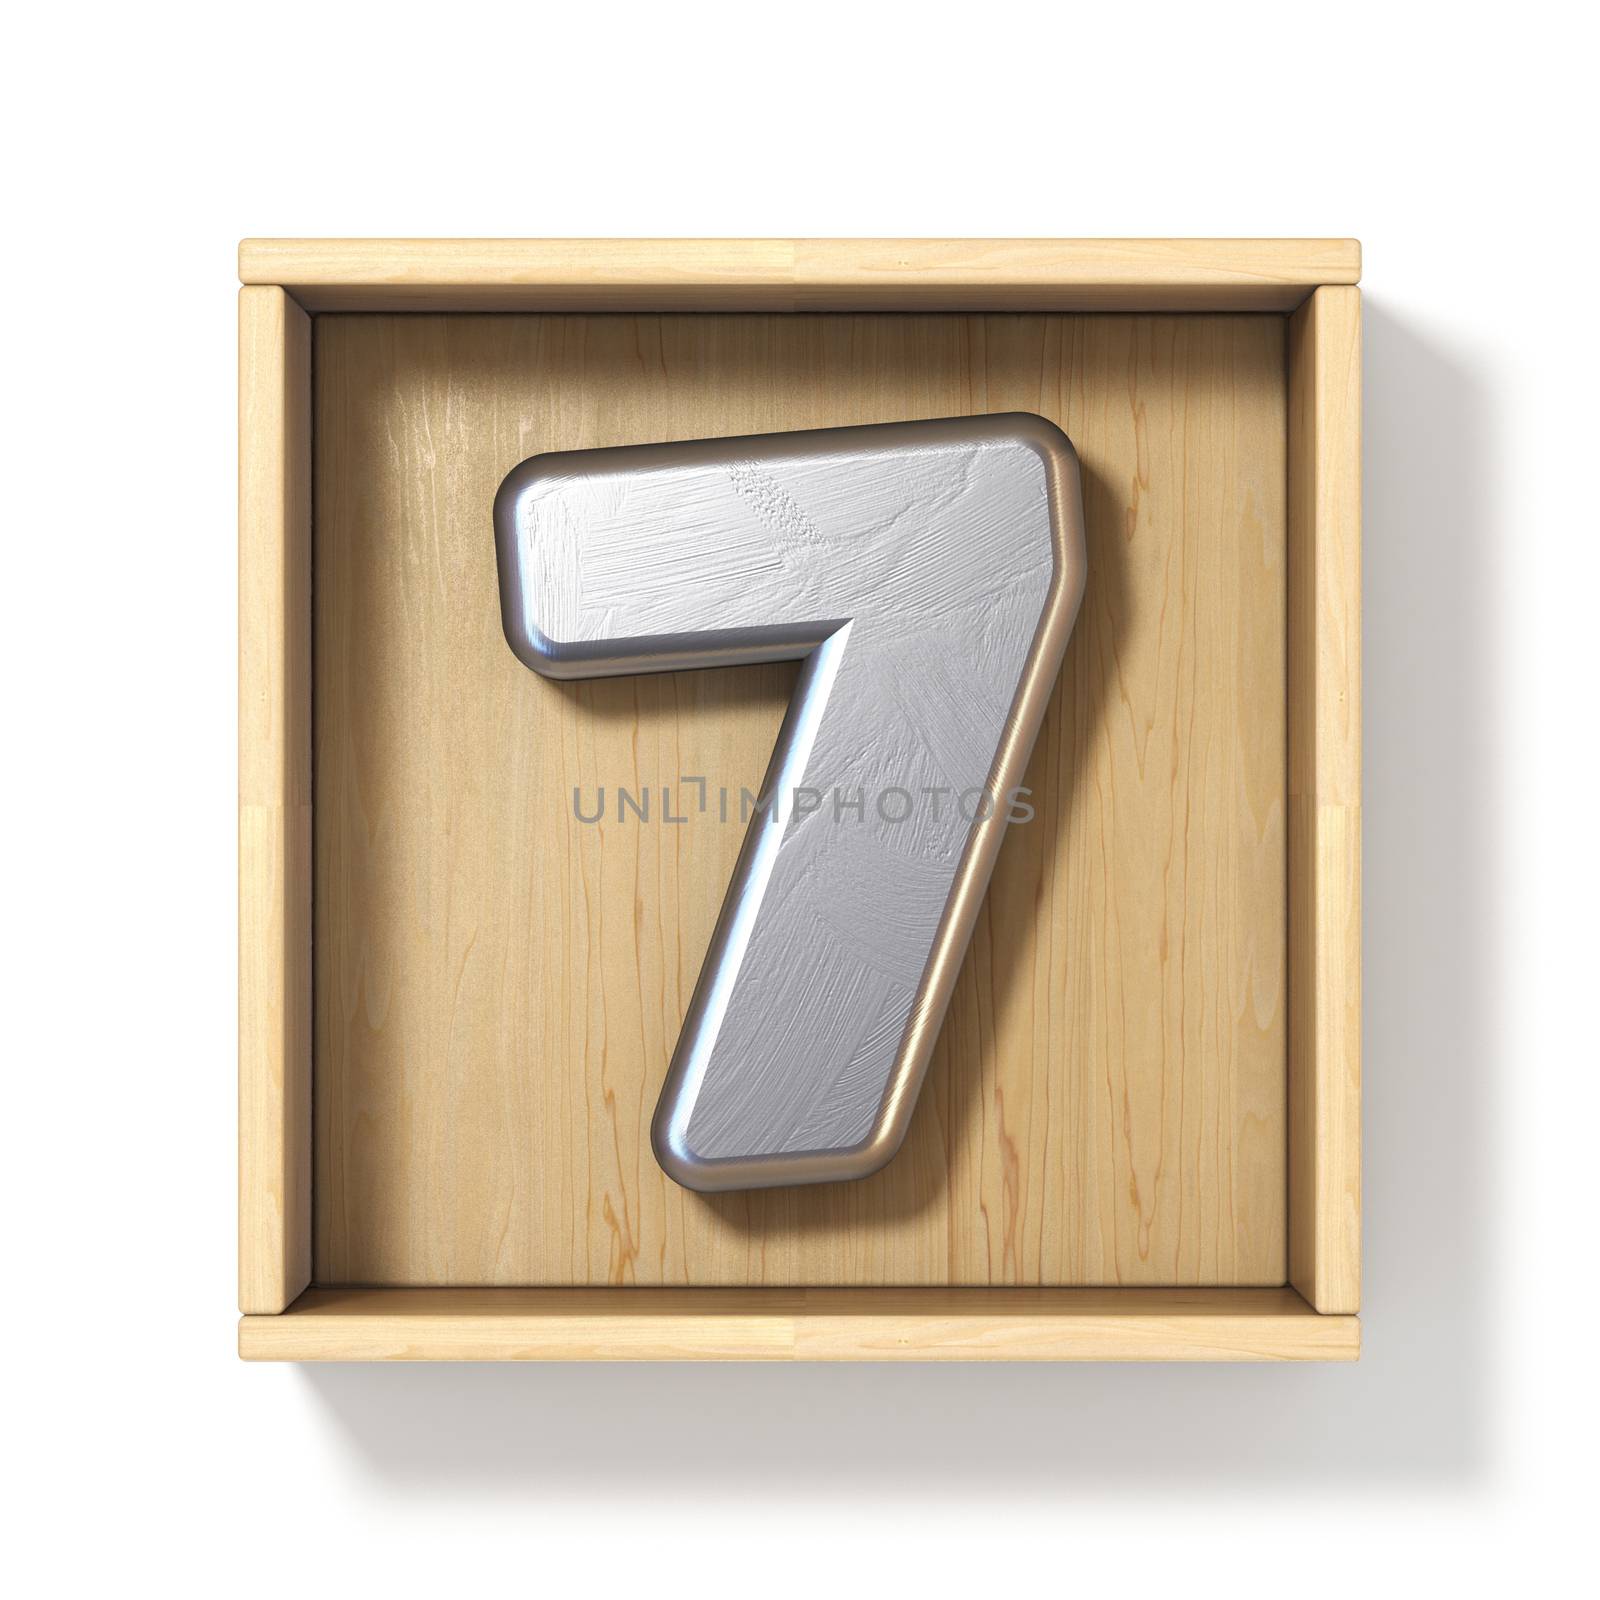 Silver metal number 7 SEVEN in wooden box 3D render illustration isolated on white background